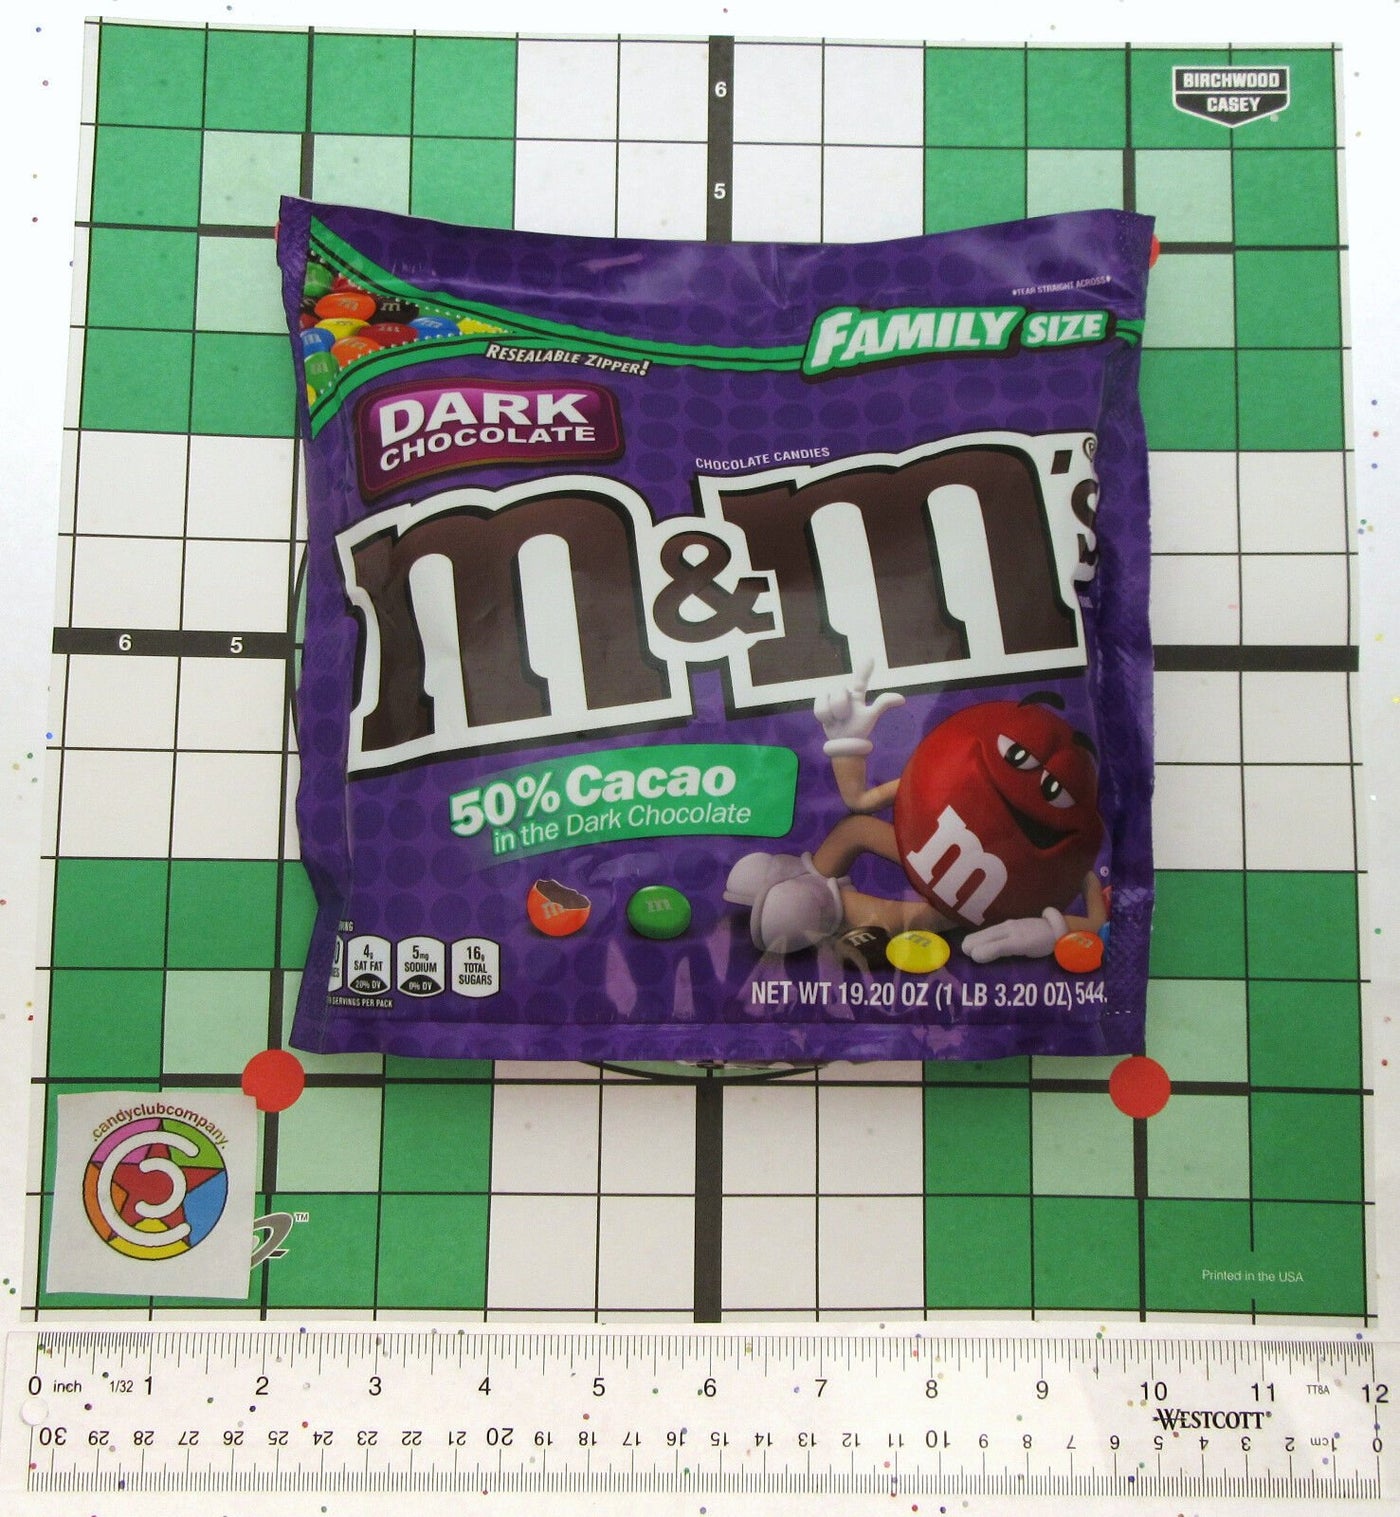  M&M'S Dark Chocolate Candy, Family Size, 18 oz Resealable Bulk  Candy Bag : M&M'S: Grocery & Gourmet Food